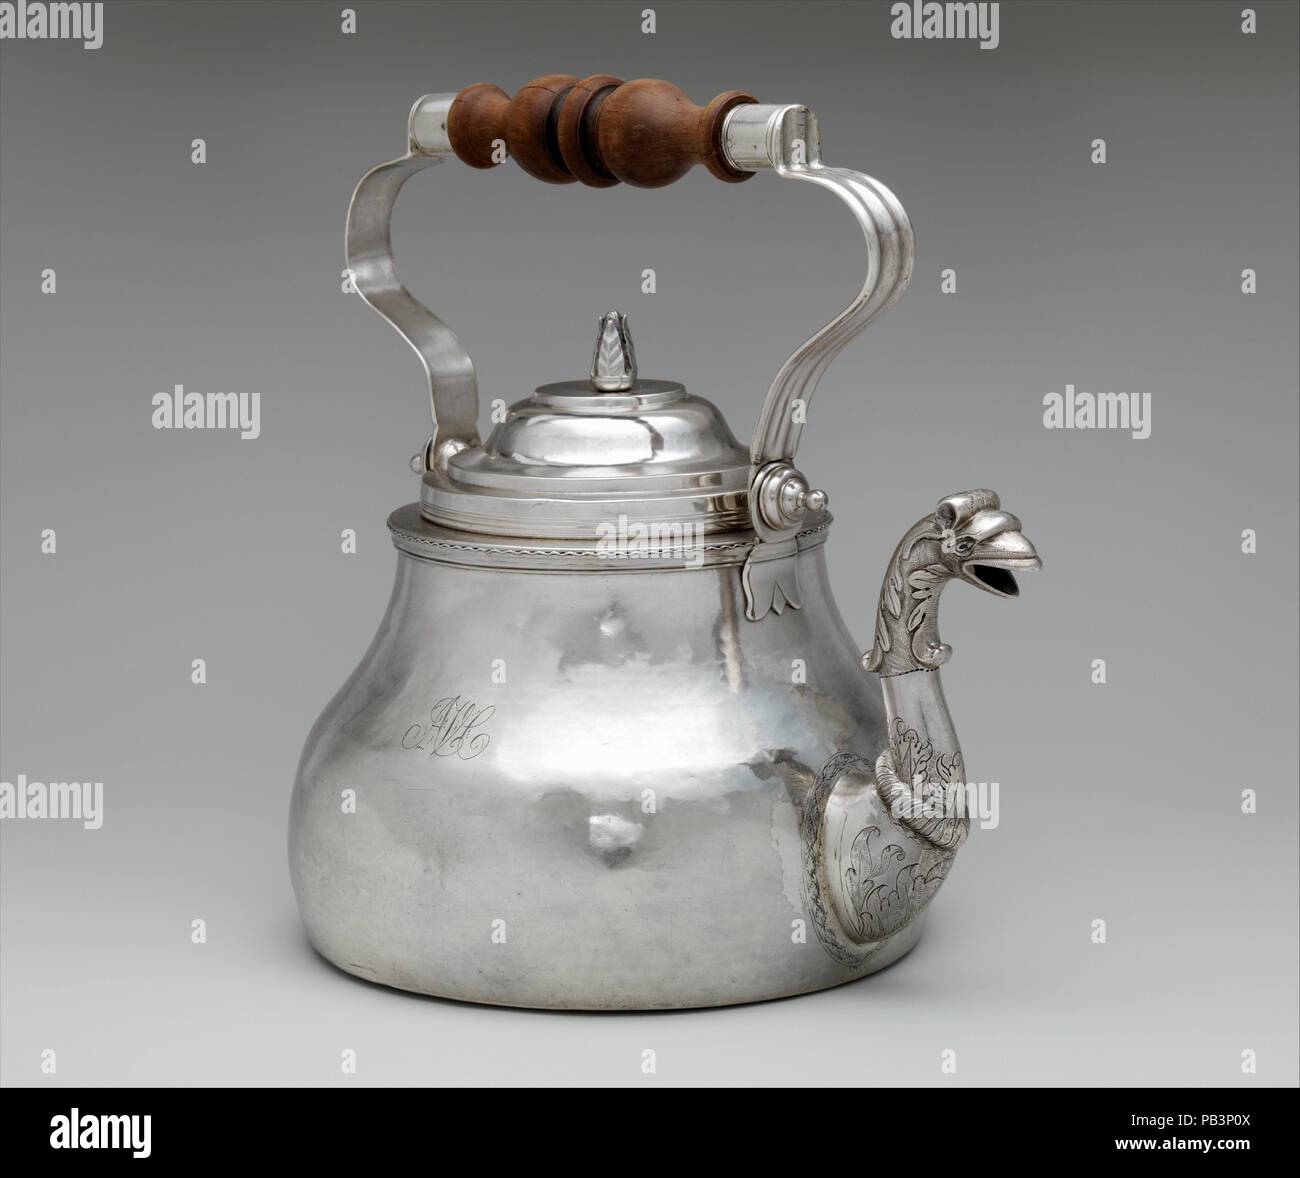 Teakettle. Culture: American. Dimensions: Overall: 10 1/8 x 10 5/8 in. (25.7 x 27 cm); 47 oz. 13 dwt. (1481.7 g)  Base: Diam. 7 3/8 in. (18.7 cm)  Body: H. 7 7/16 in. (18.9 cm). Maker: Cornelius Kierstede (1674-ca. 1757). Date: 1710-20.  As in England and the Netherlands, tea drinking became increasingly popular in colonial America, creating a demand for specialized tea equipment such as teapots, sugar bowls, and creampots. This bold, pear-shaped teakettle with bail handle is an extremely rare form in American silver. Its decorative bird's-head spout, distinctively Dutch in inspiration, enlive Stock Photo